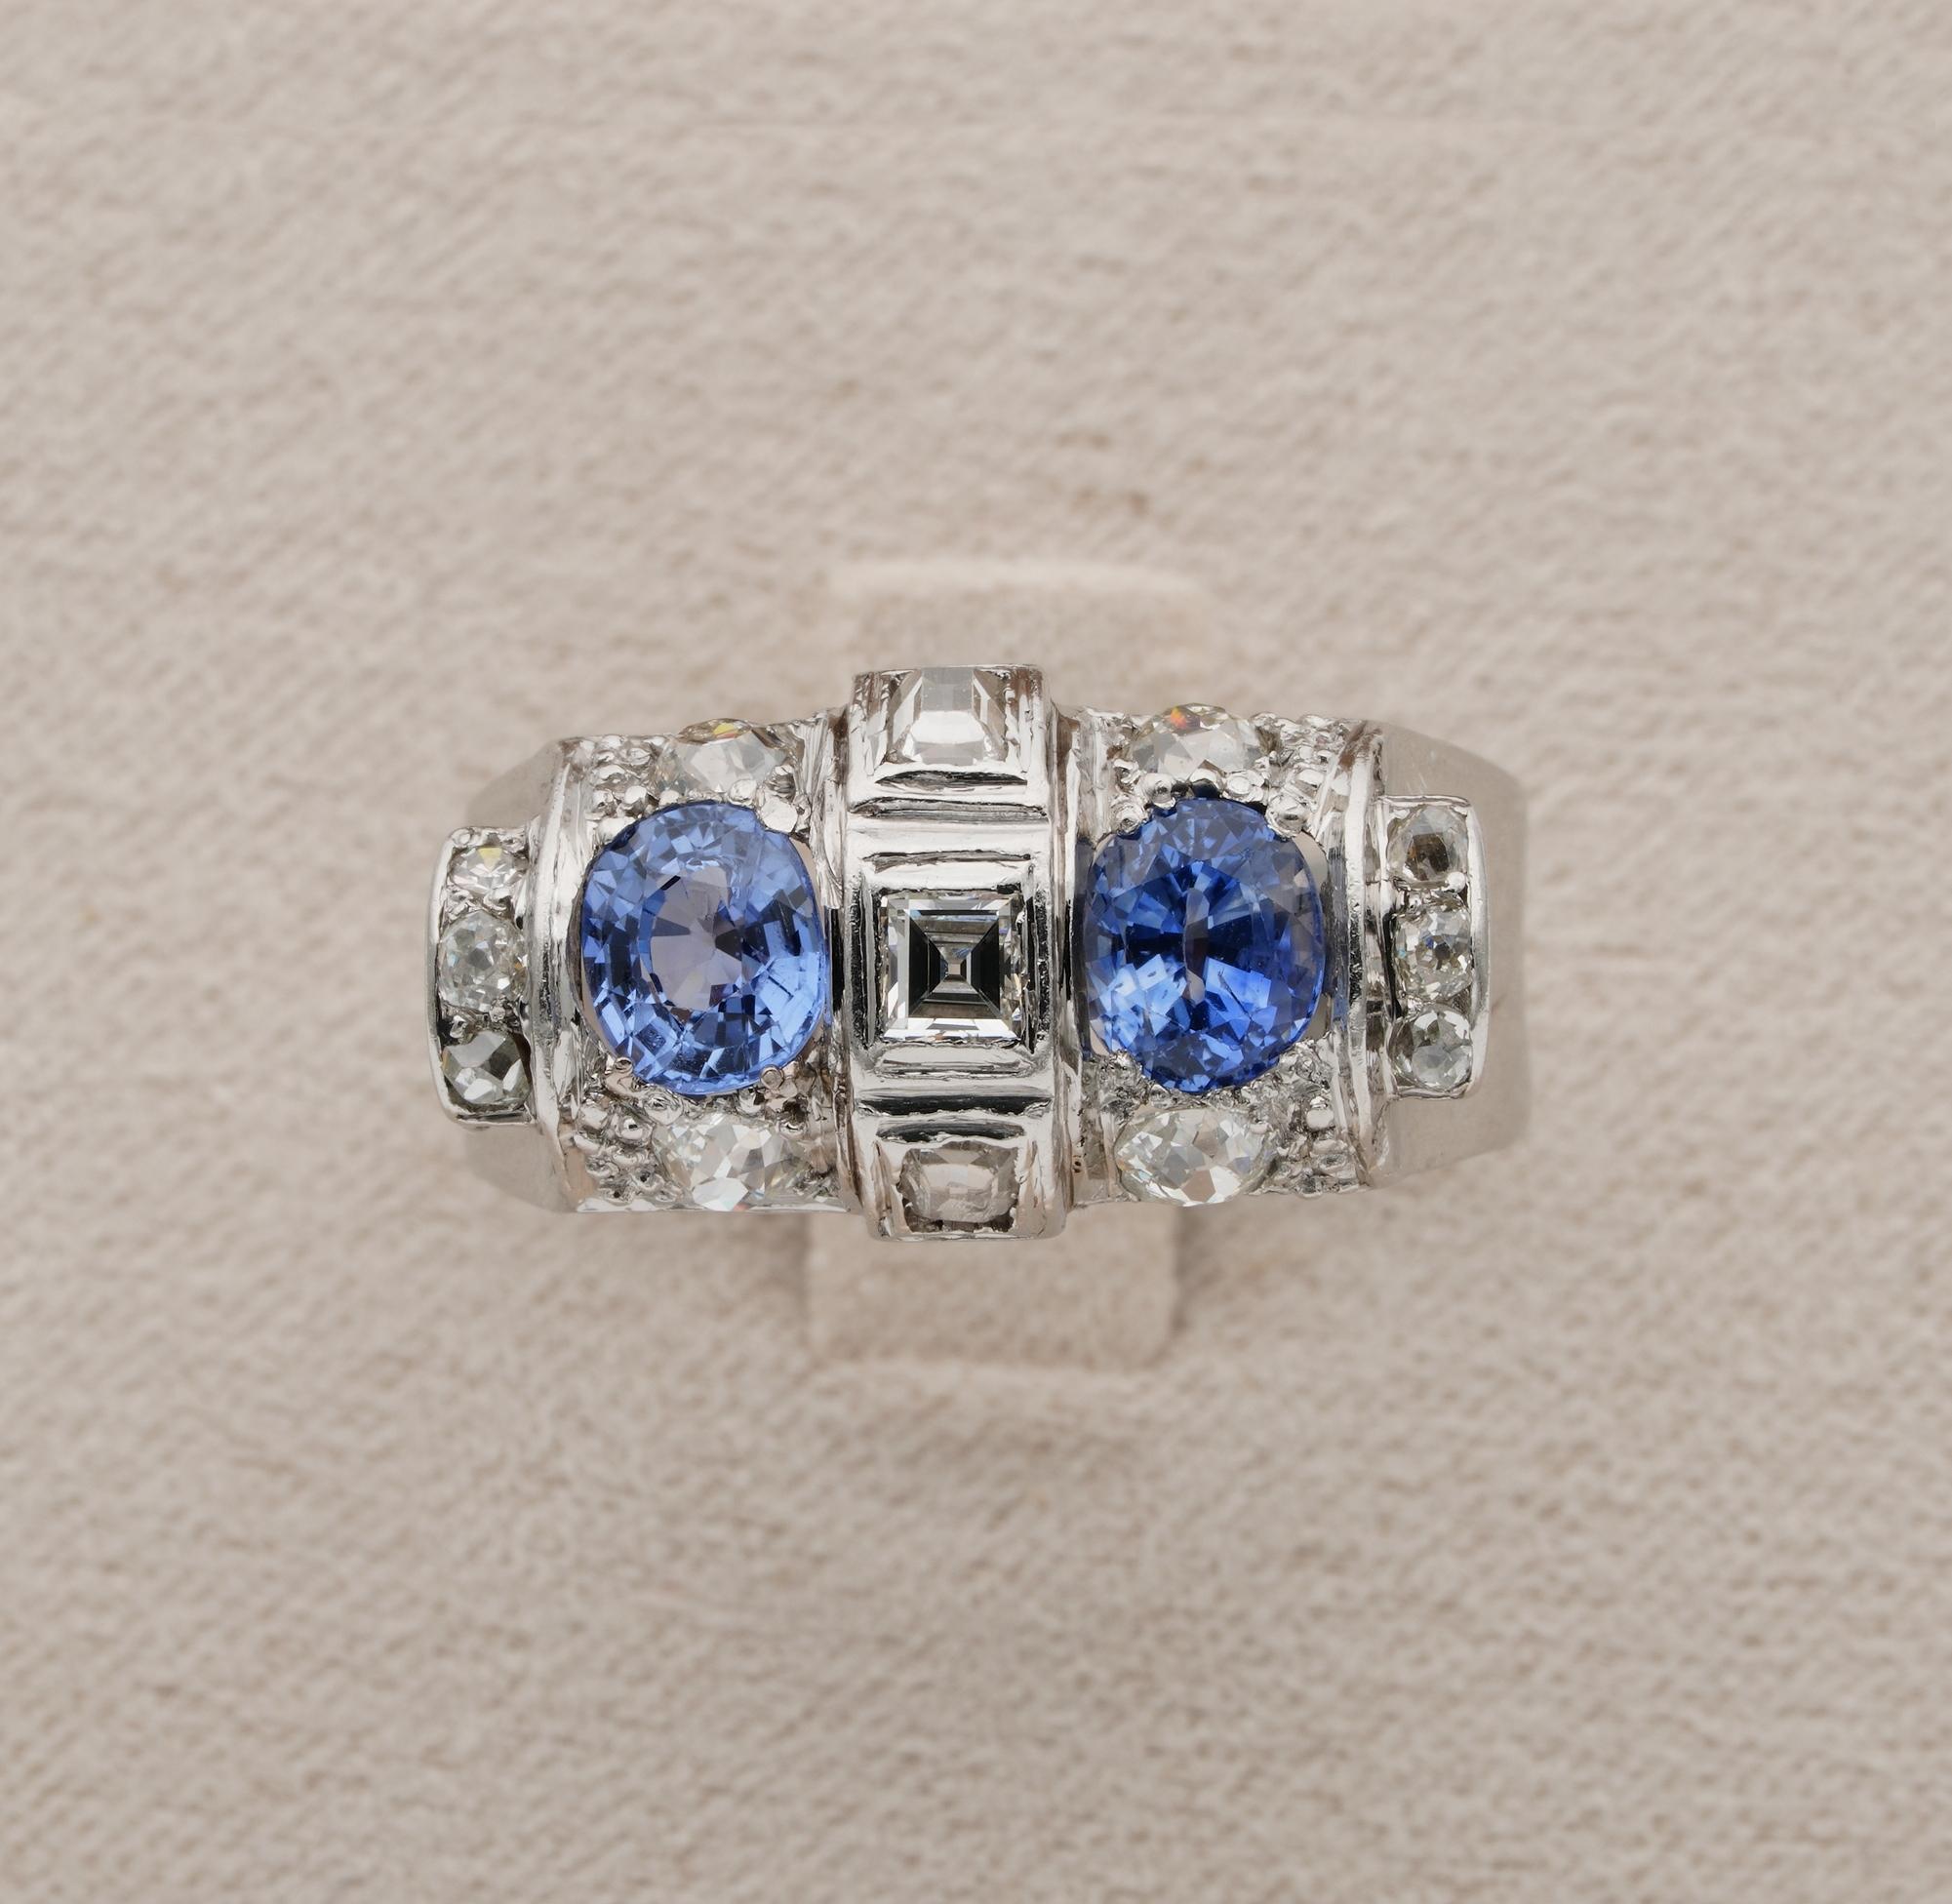 This fabulous antique ring is Art deco period, 1925 ca
Geometric artful designed of the era structured by a play of Diamonds and Sapphires
Ring has been hand crafted of Platinum, marked
Ceylon origin Sapphires approx 1.60 Ct. gorgeous cornflower